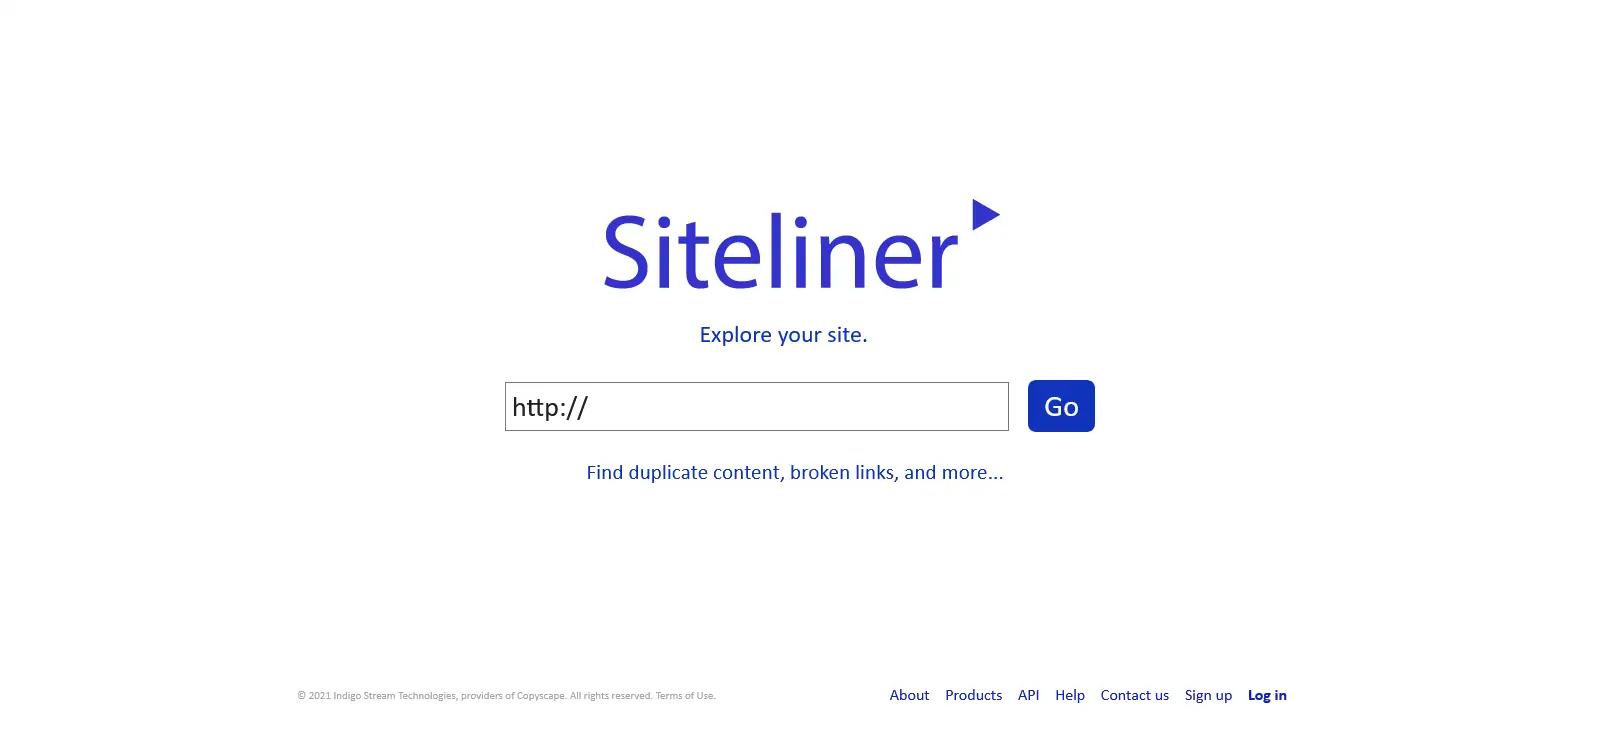 Siteliner Find Duplicate Content on your site - SEO Tools: 18 SEO Tools Used by SEO Experts